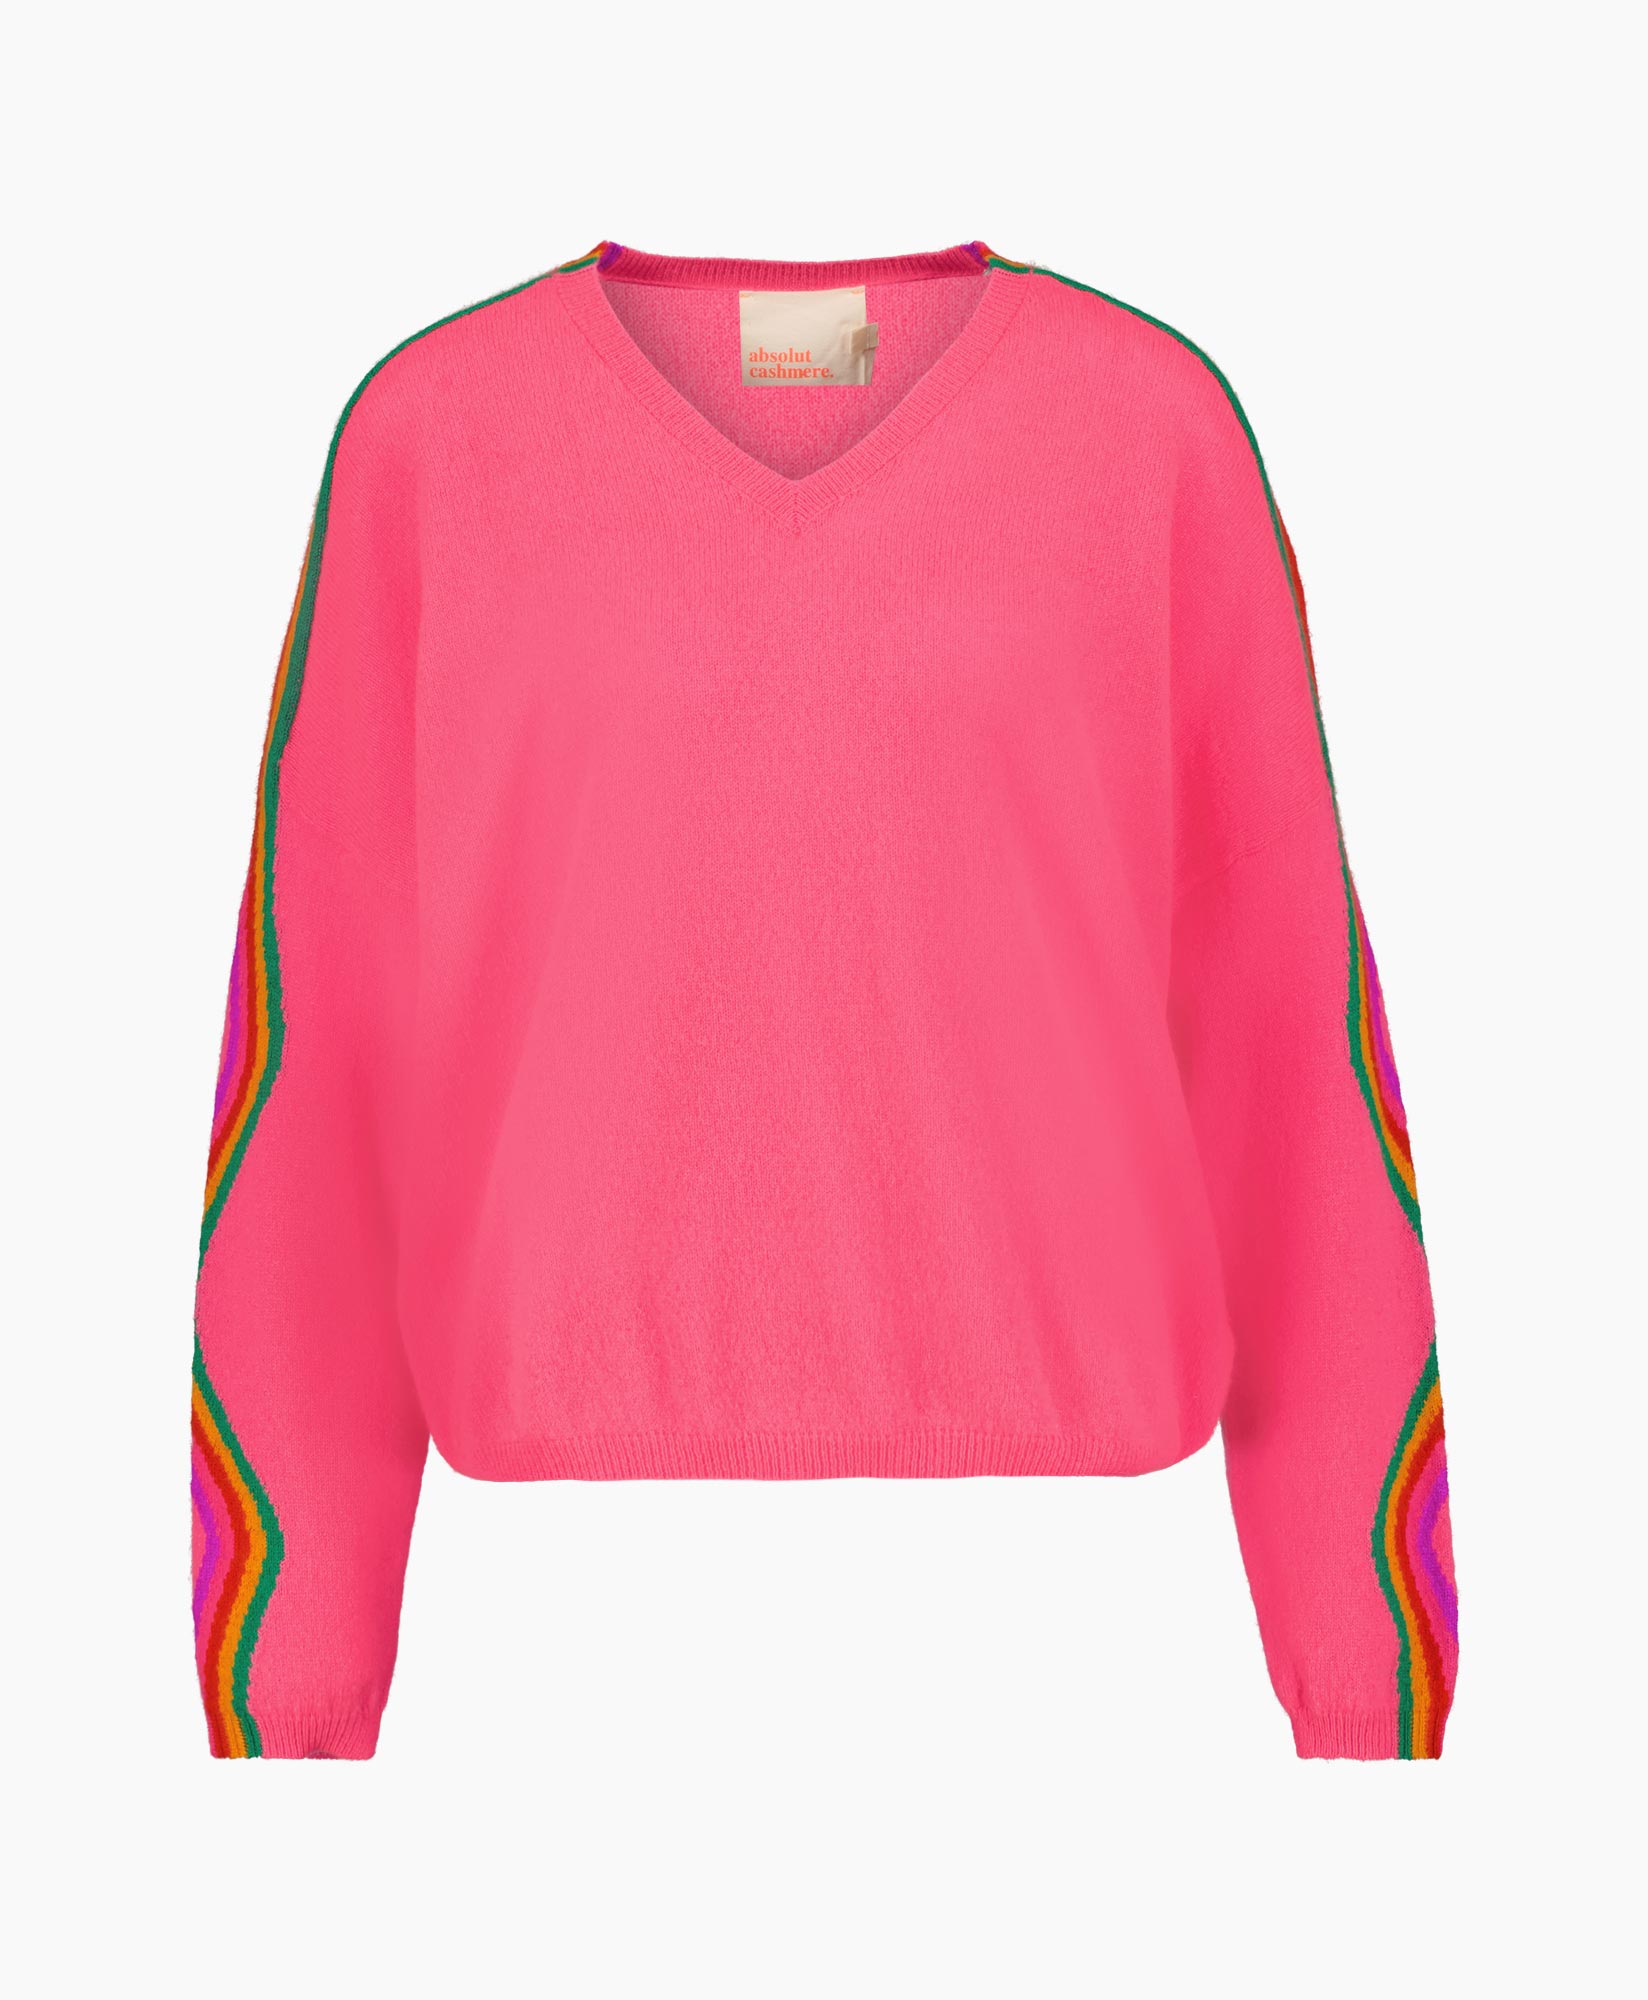 Absolut Cashmere Pullover Rylie Ac152037c Pink